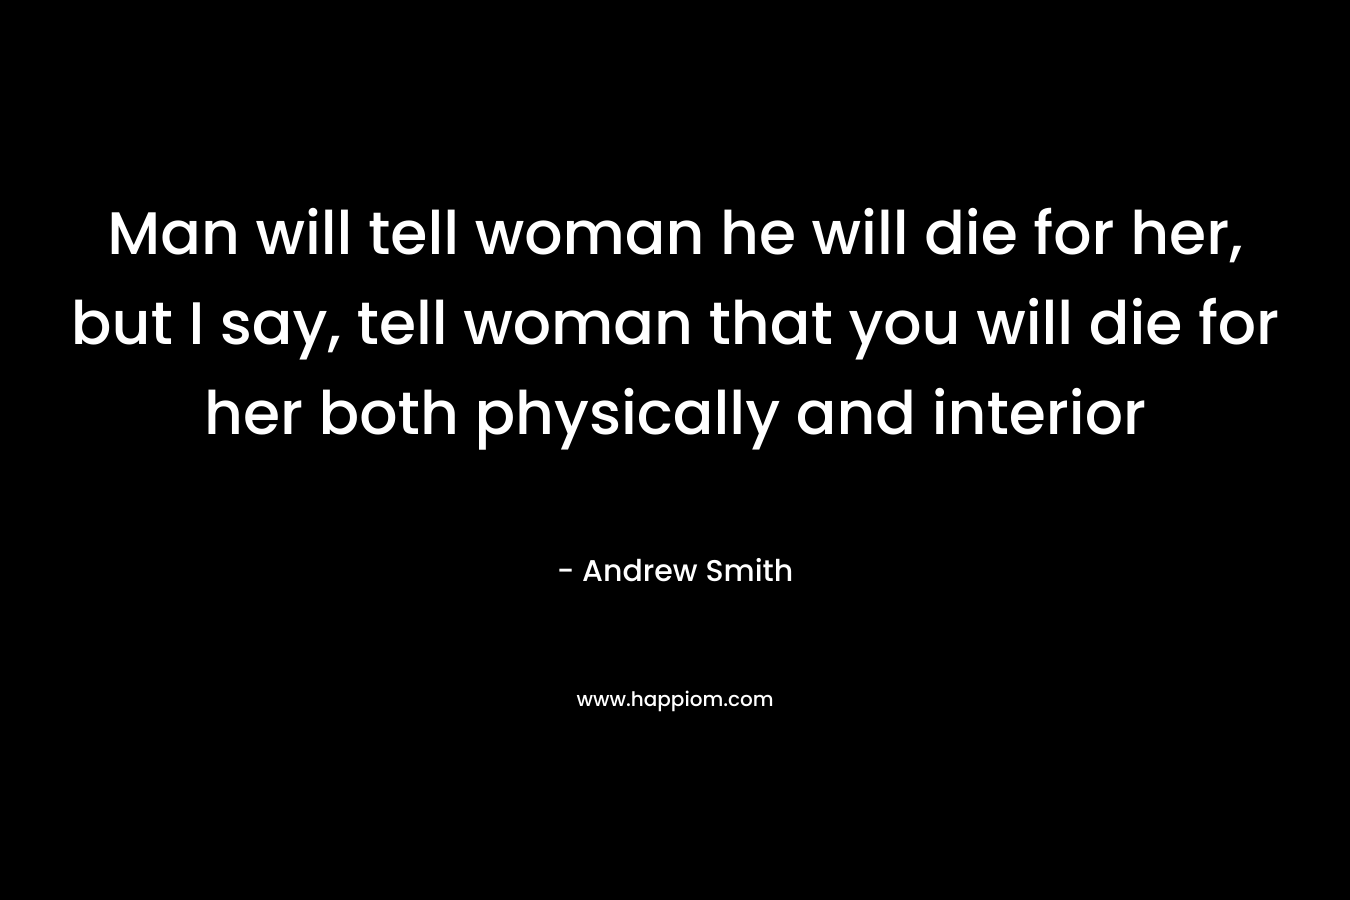 Man will tell woman he will die for her, but I say, tell woman that you will die for her both physically and interior – Andrew Smith